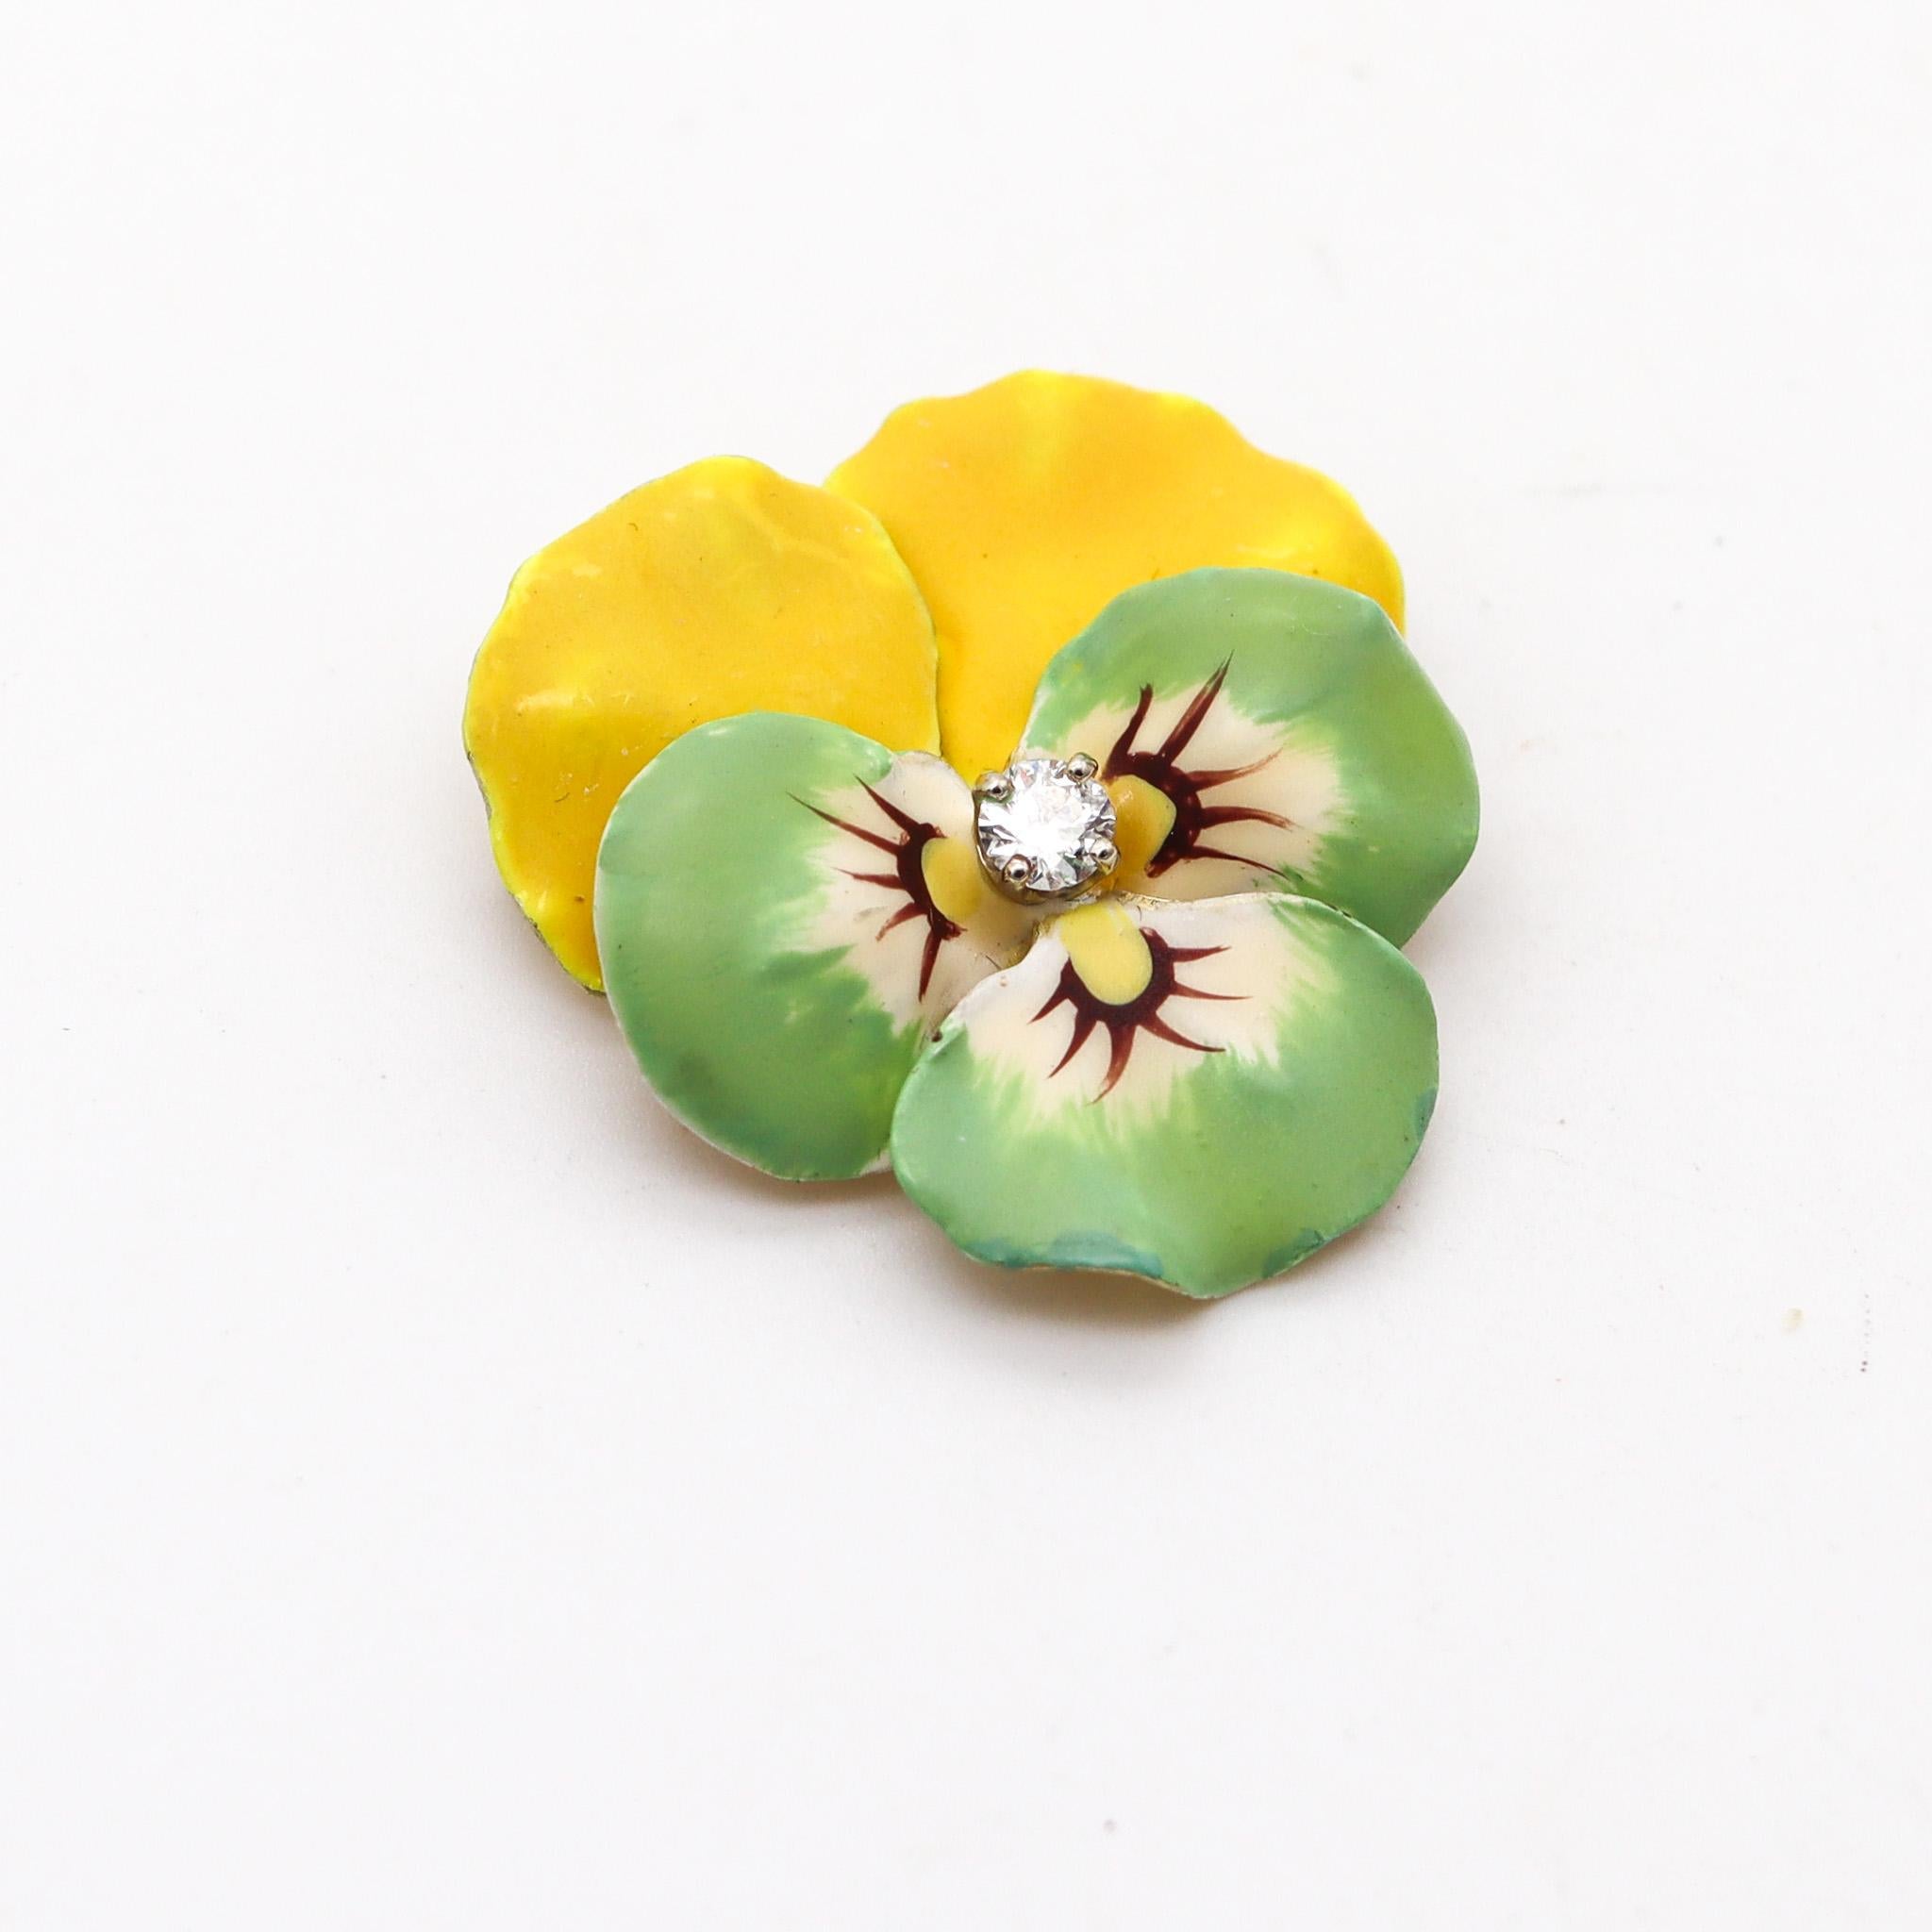 Edwardian enameled white Pansy flower brooch.

Beautiful three-dimensional five-petals pansy flower, created in New Jersey North America during the Edwardian and the Art Nouveau periods, between the 1900-1910. This brooch has been carefully crafted